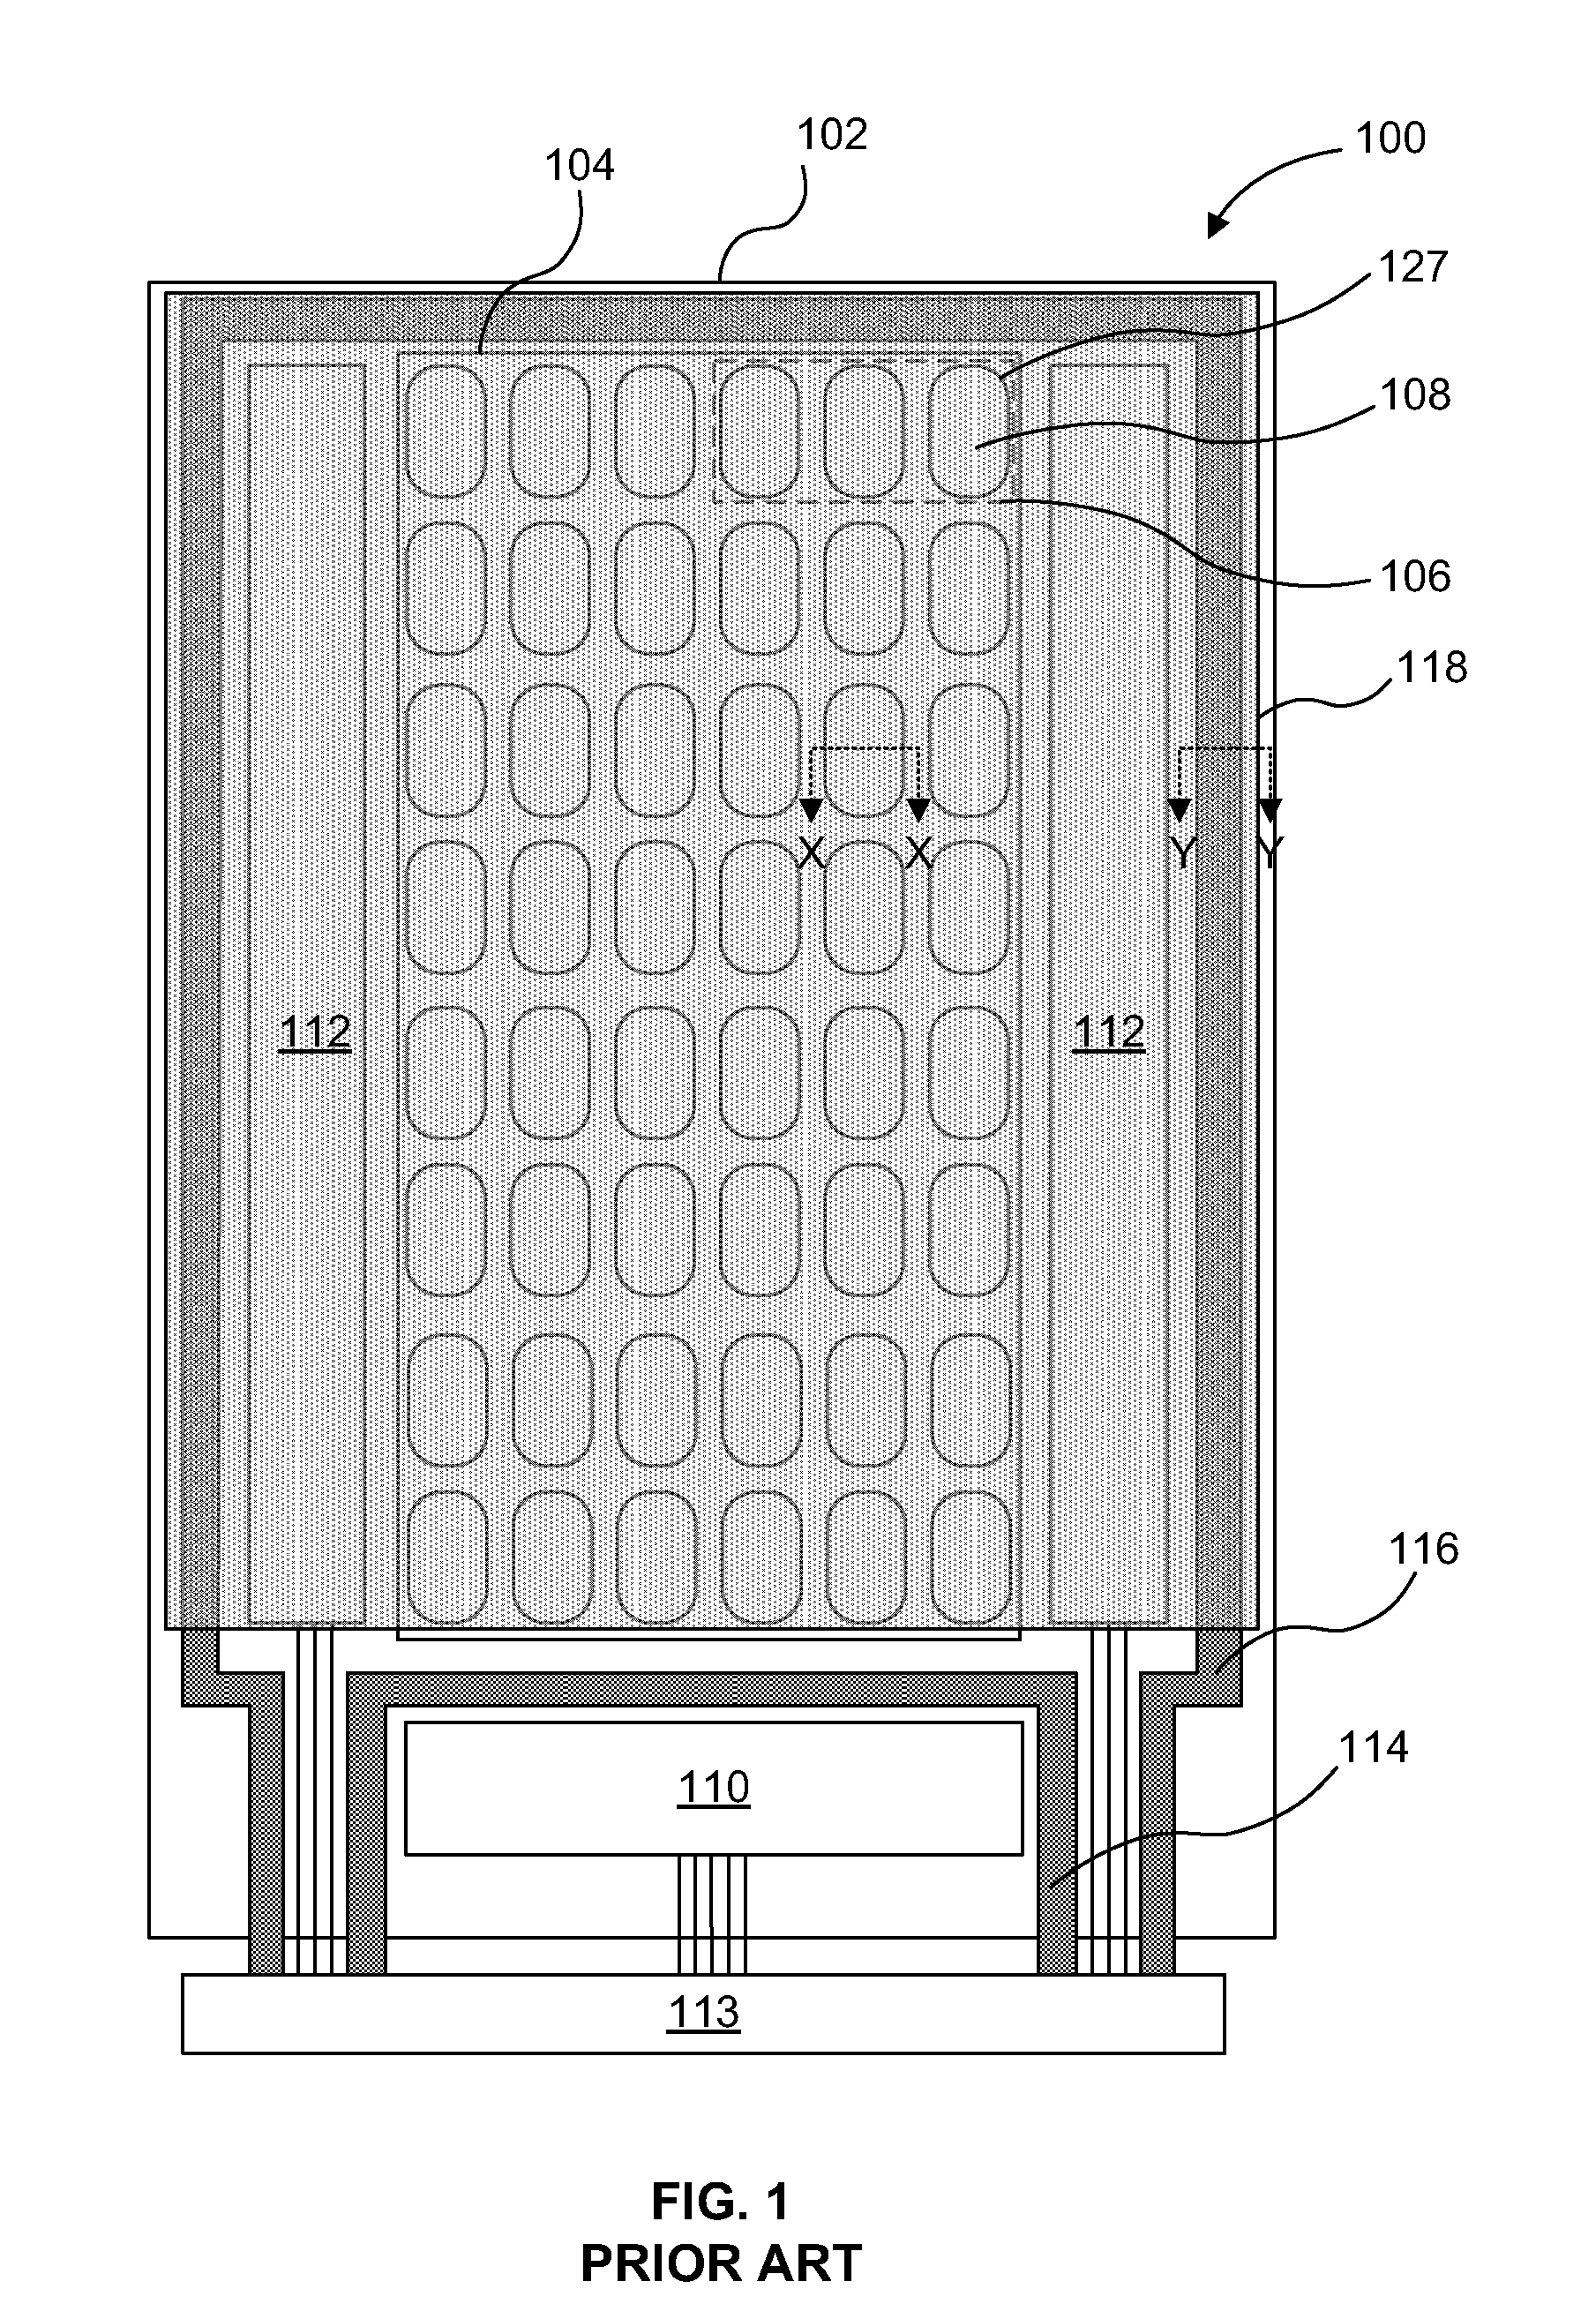 Method of fabricating a light emitting diode display with integrated defect detection test